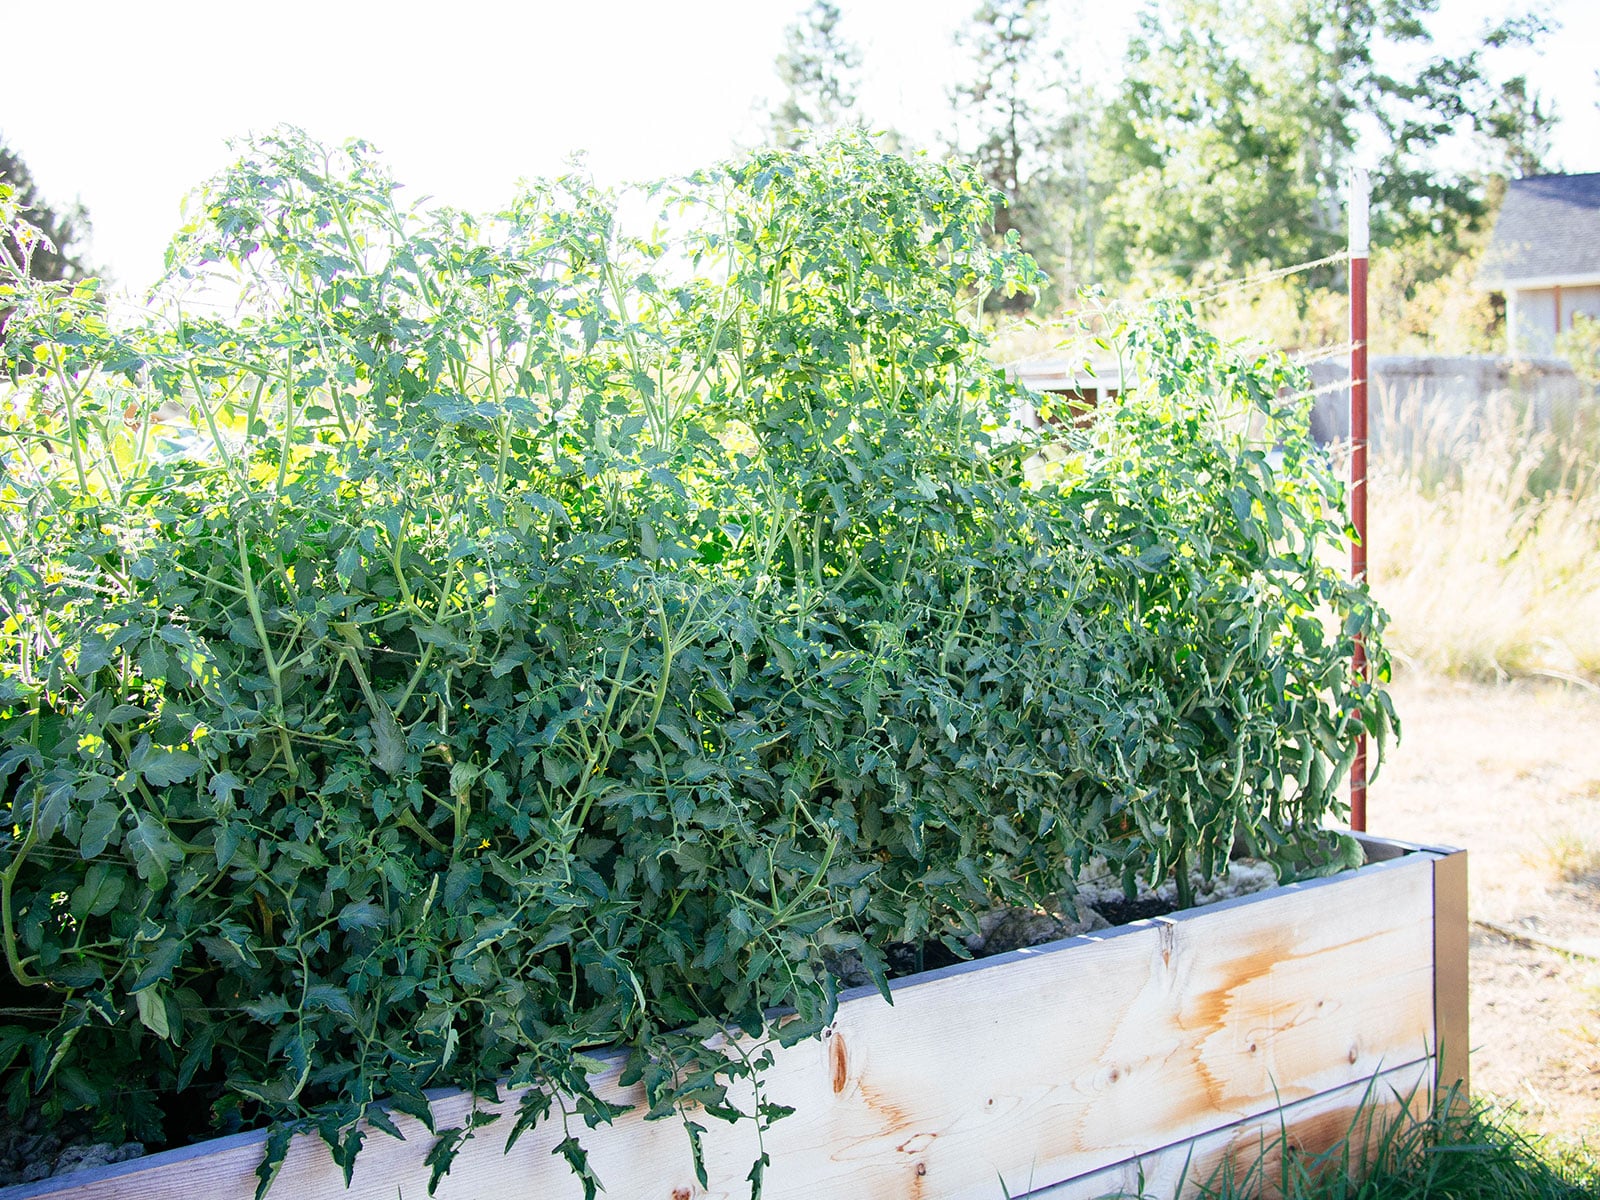 Large tomato plants trellised in a raised bed with the Florida weave technique